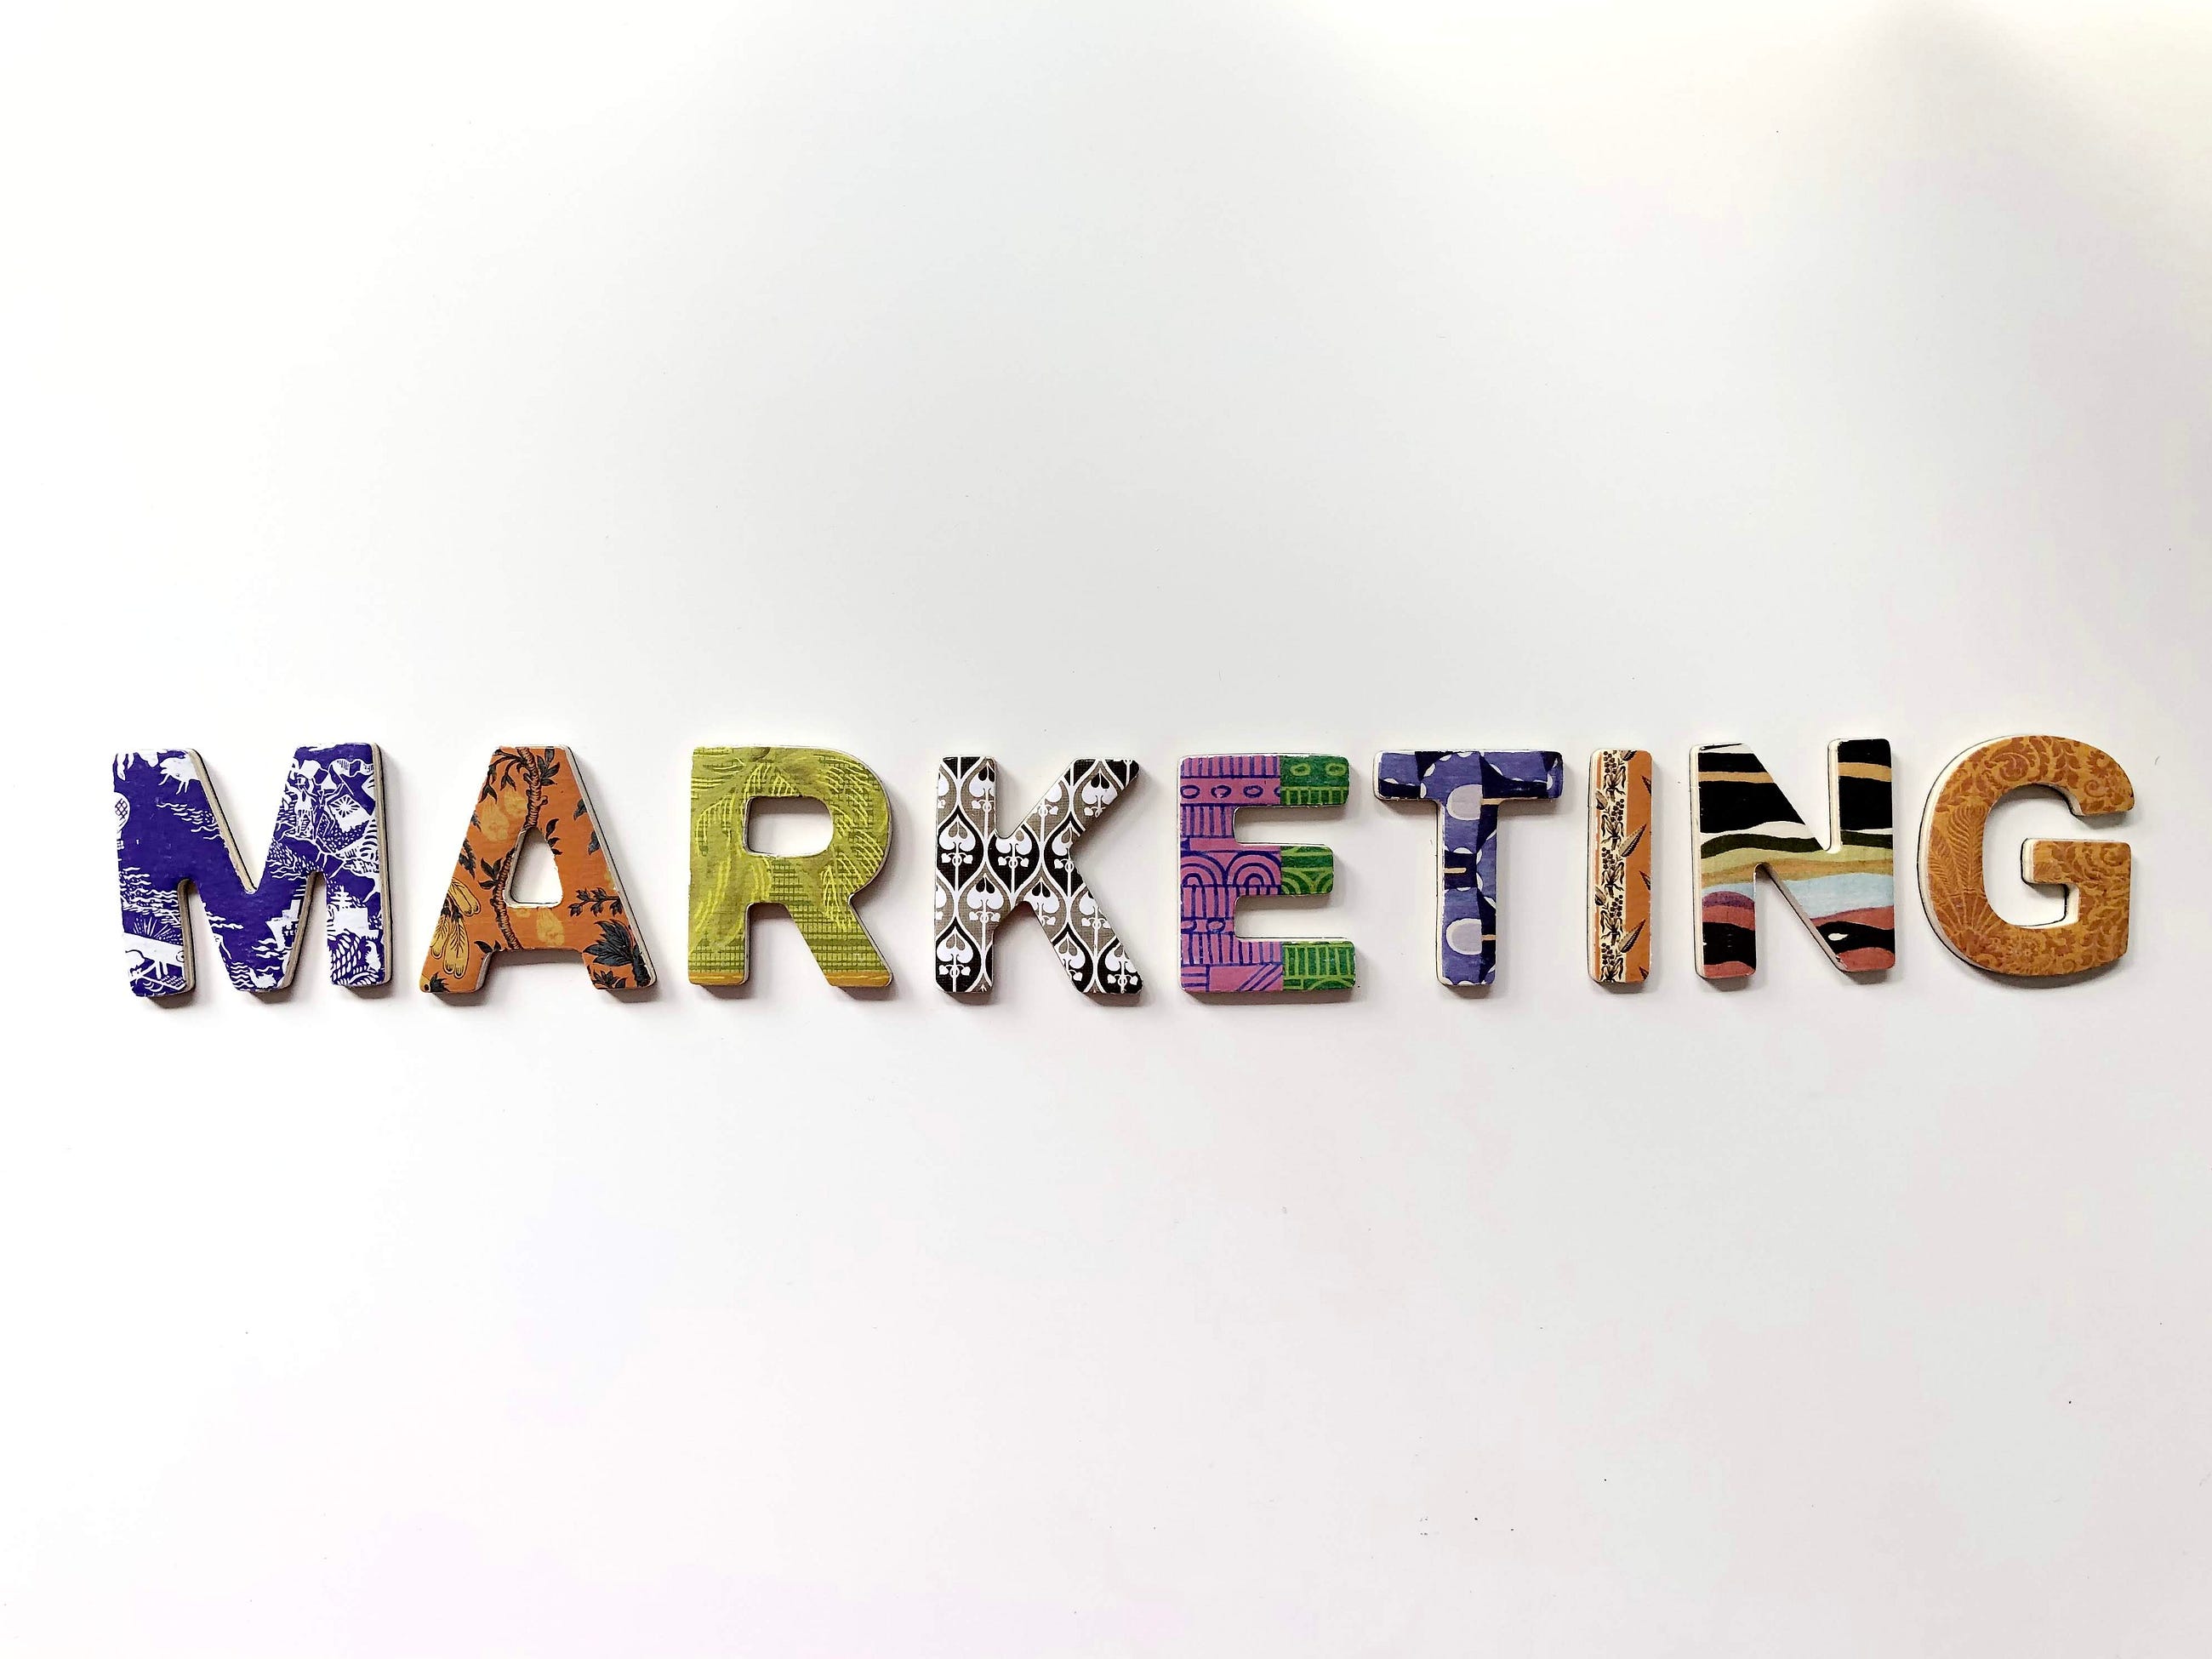 6 Digital Marketing Tips for Marketers in 2021